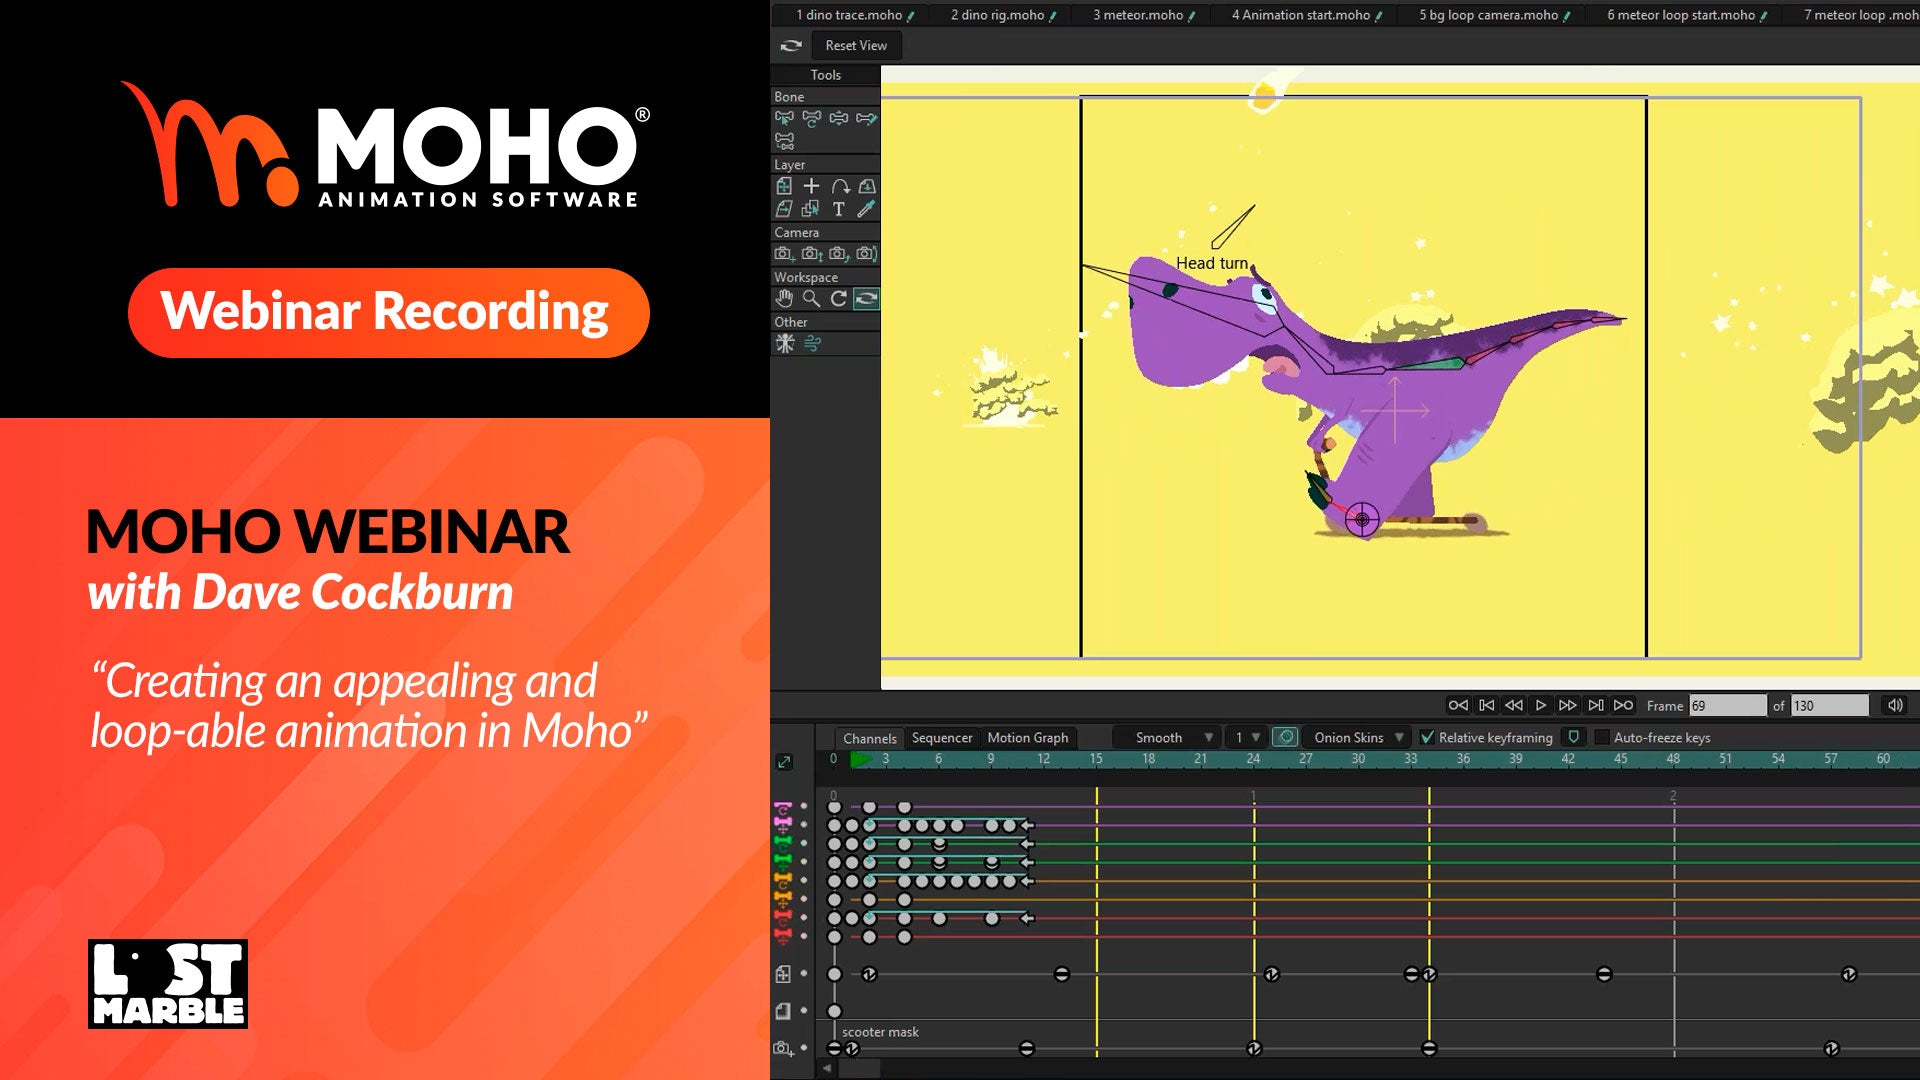 Webinar recording: Creating an appealing and loop able animation in Moho with Dave Cockburn